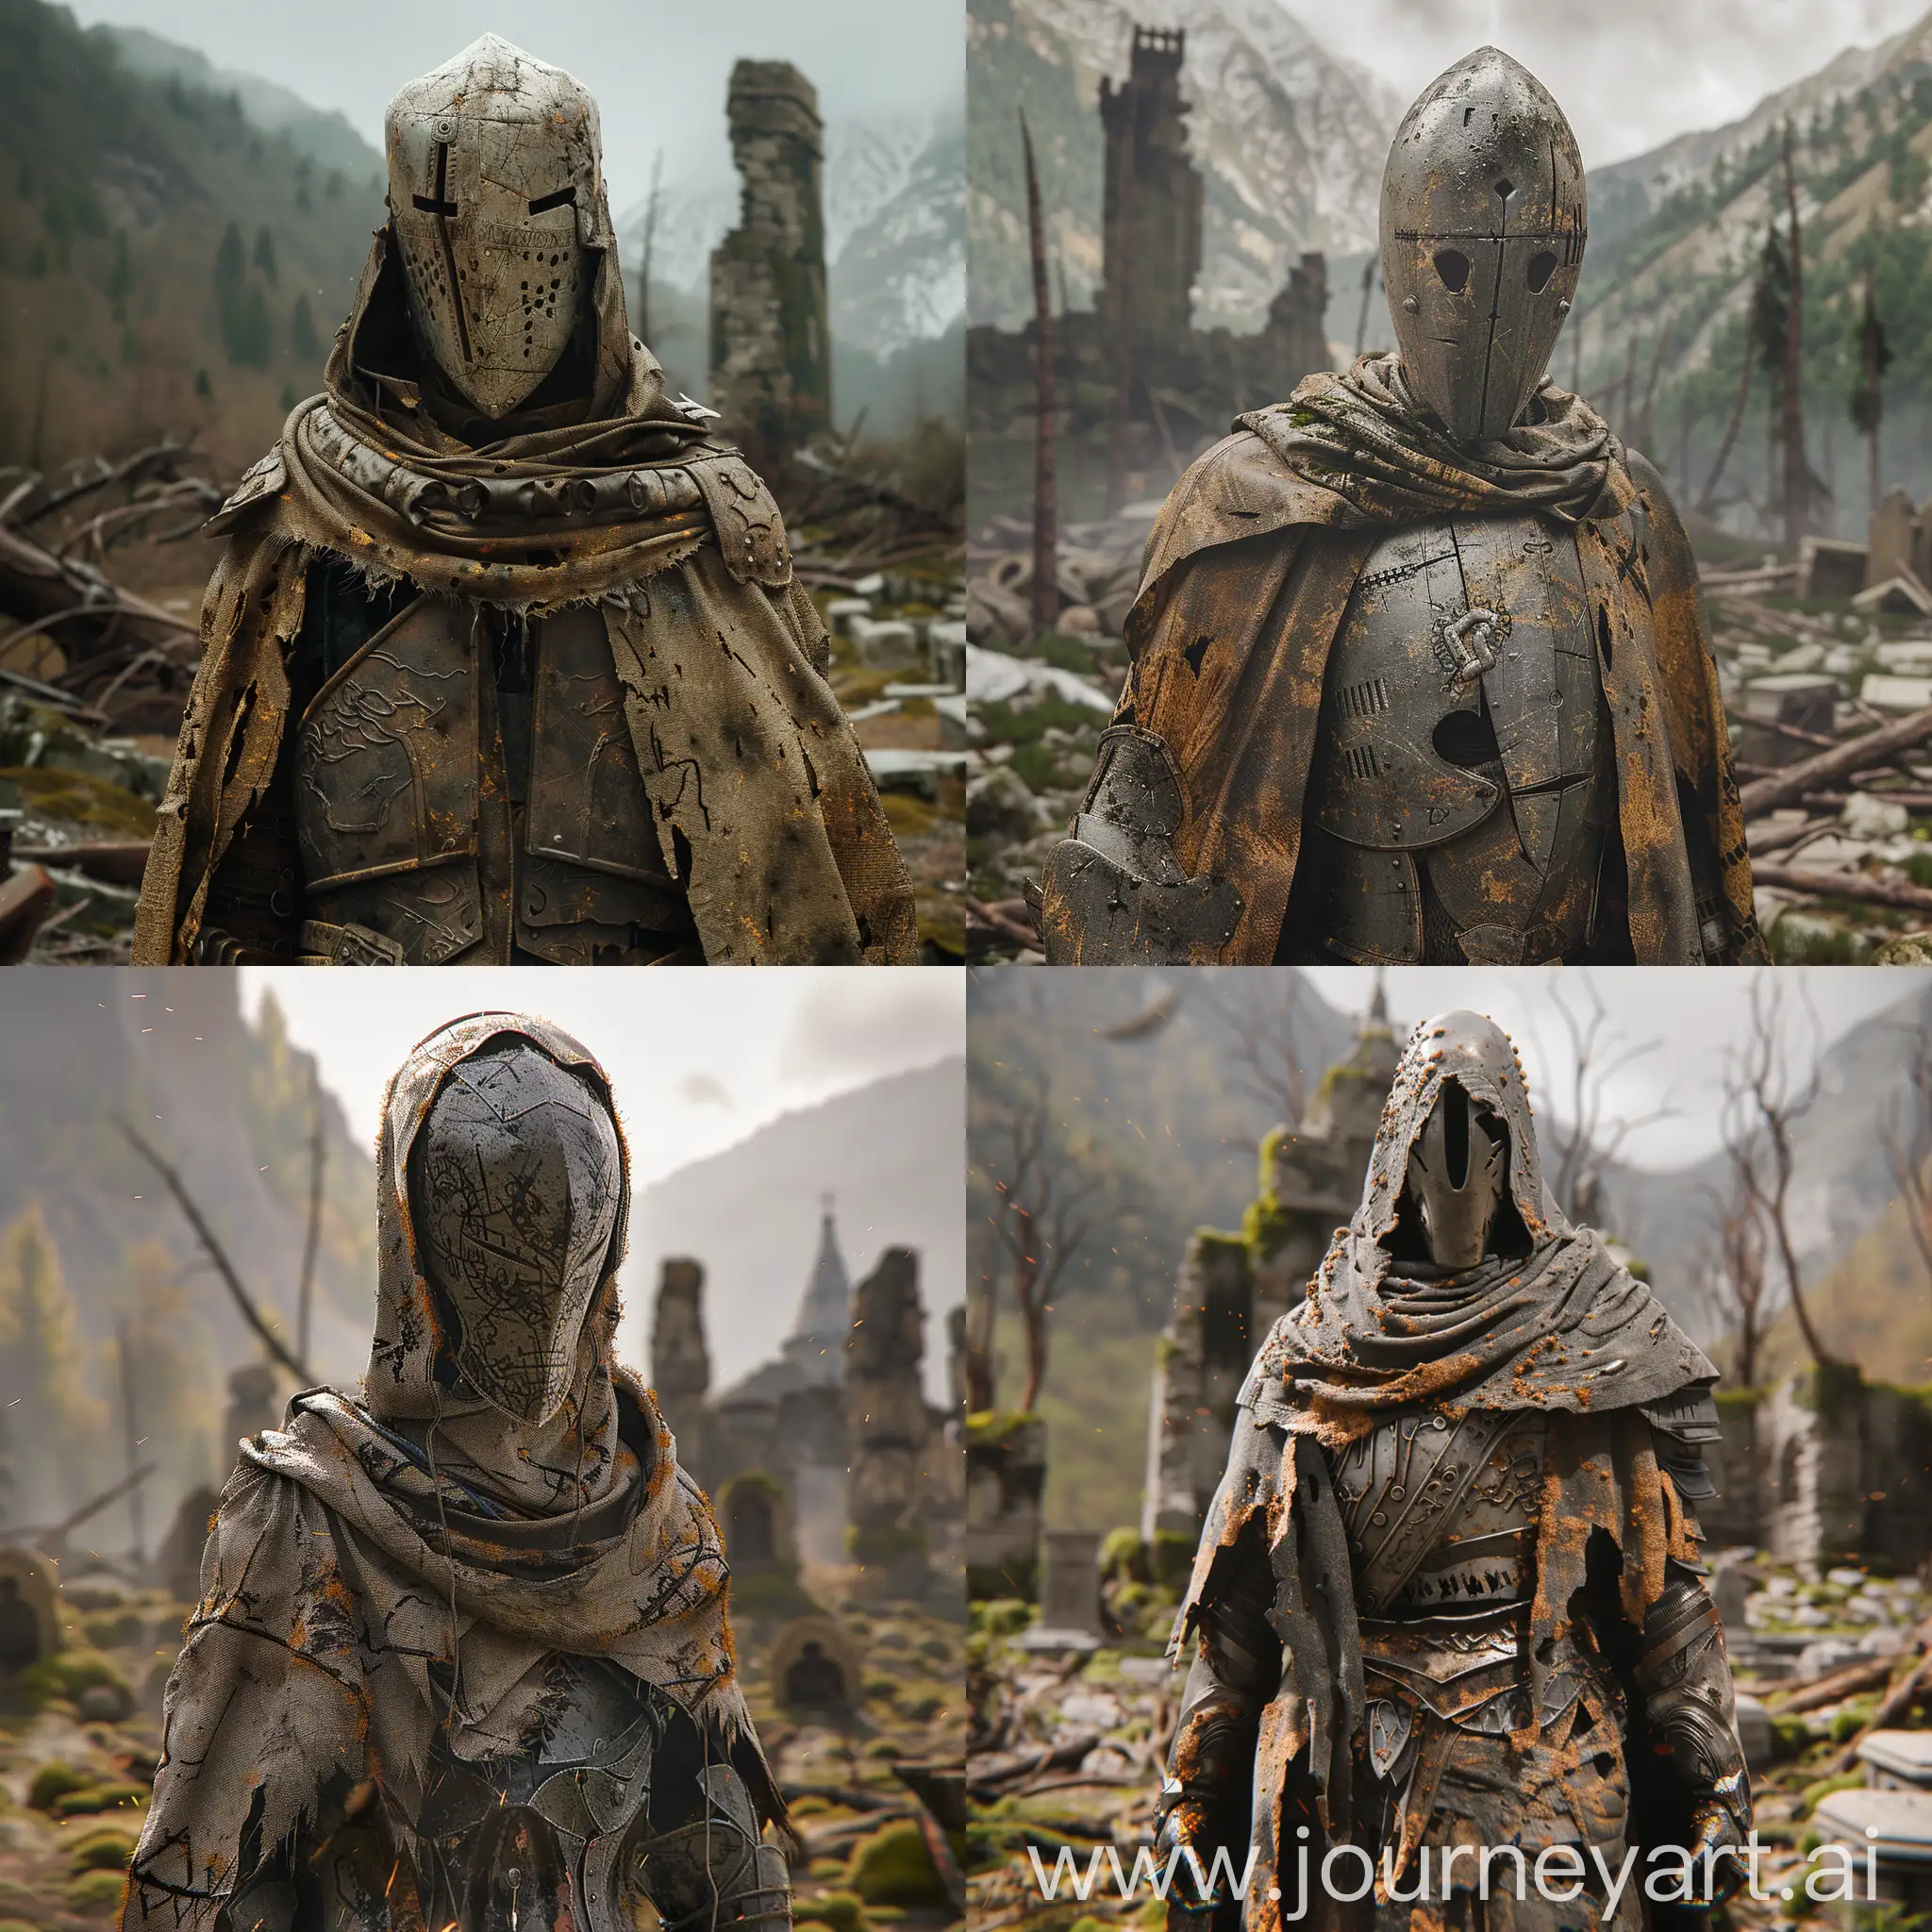 Masterpiece, 4k, unreal engine m5, volumetric lighting, dof, bokeh, hyper realism, adof, vignette, dust, moss, aged, old, scarred, burnt, runic, holy, magic, scorcerer, mechanized, light armour, dark fantasy, fantasy featureless helmet, highly detailed, tattered robes, burnt robes, destroyed land, castle ruins in background, burnt wood, unmarked tombs, mountainous background, dead forest